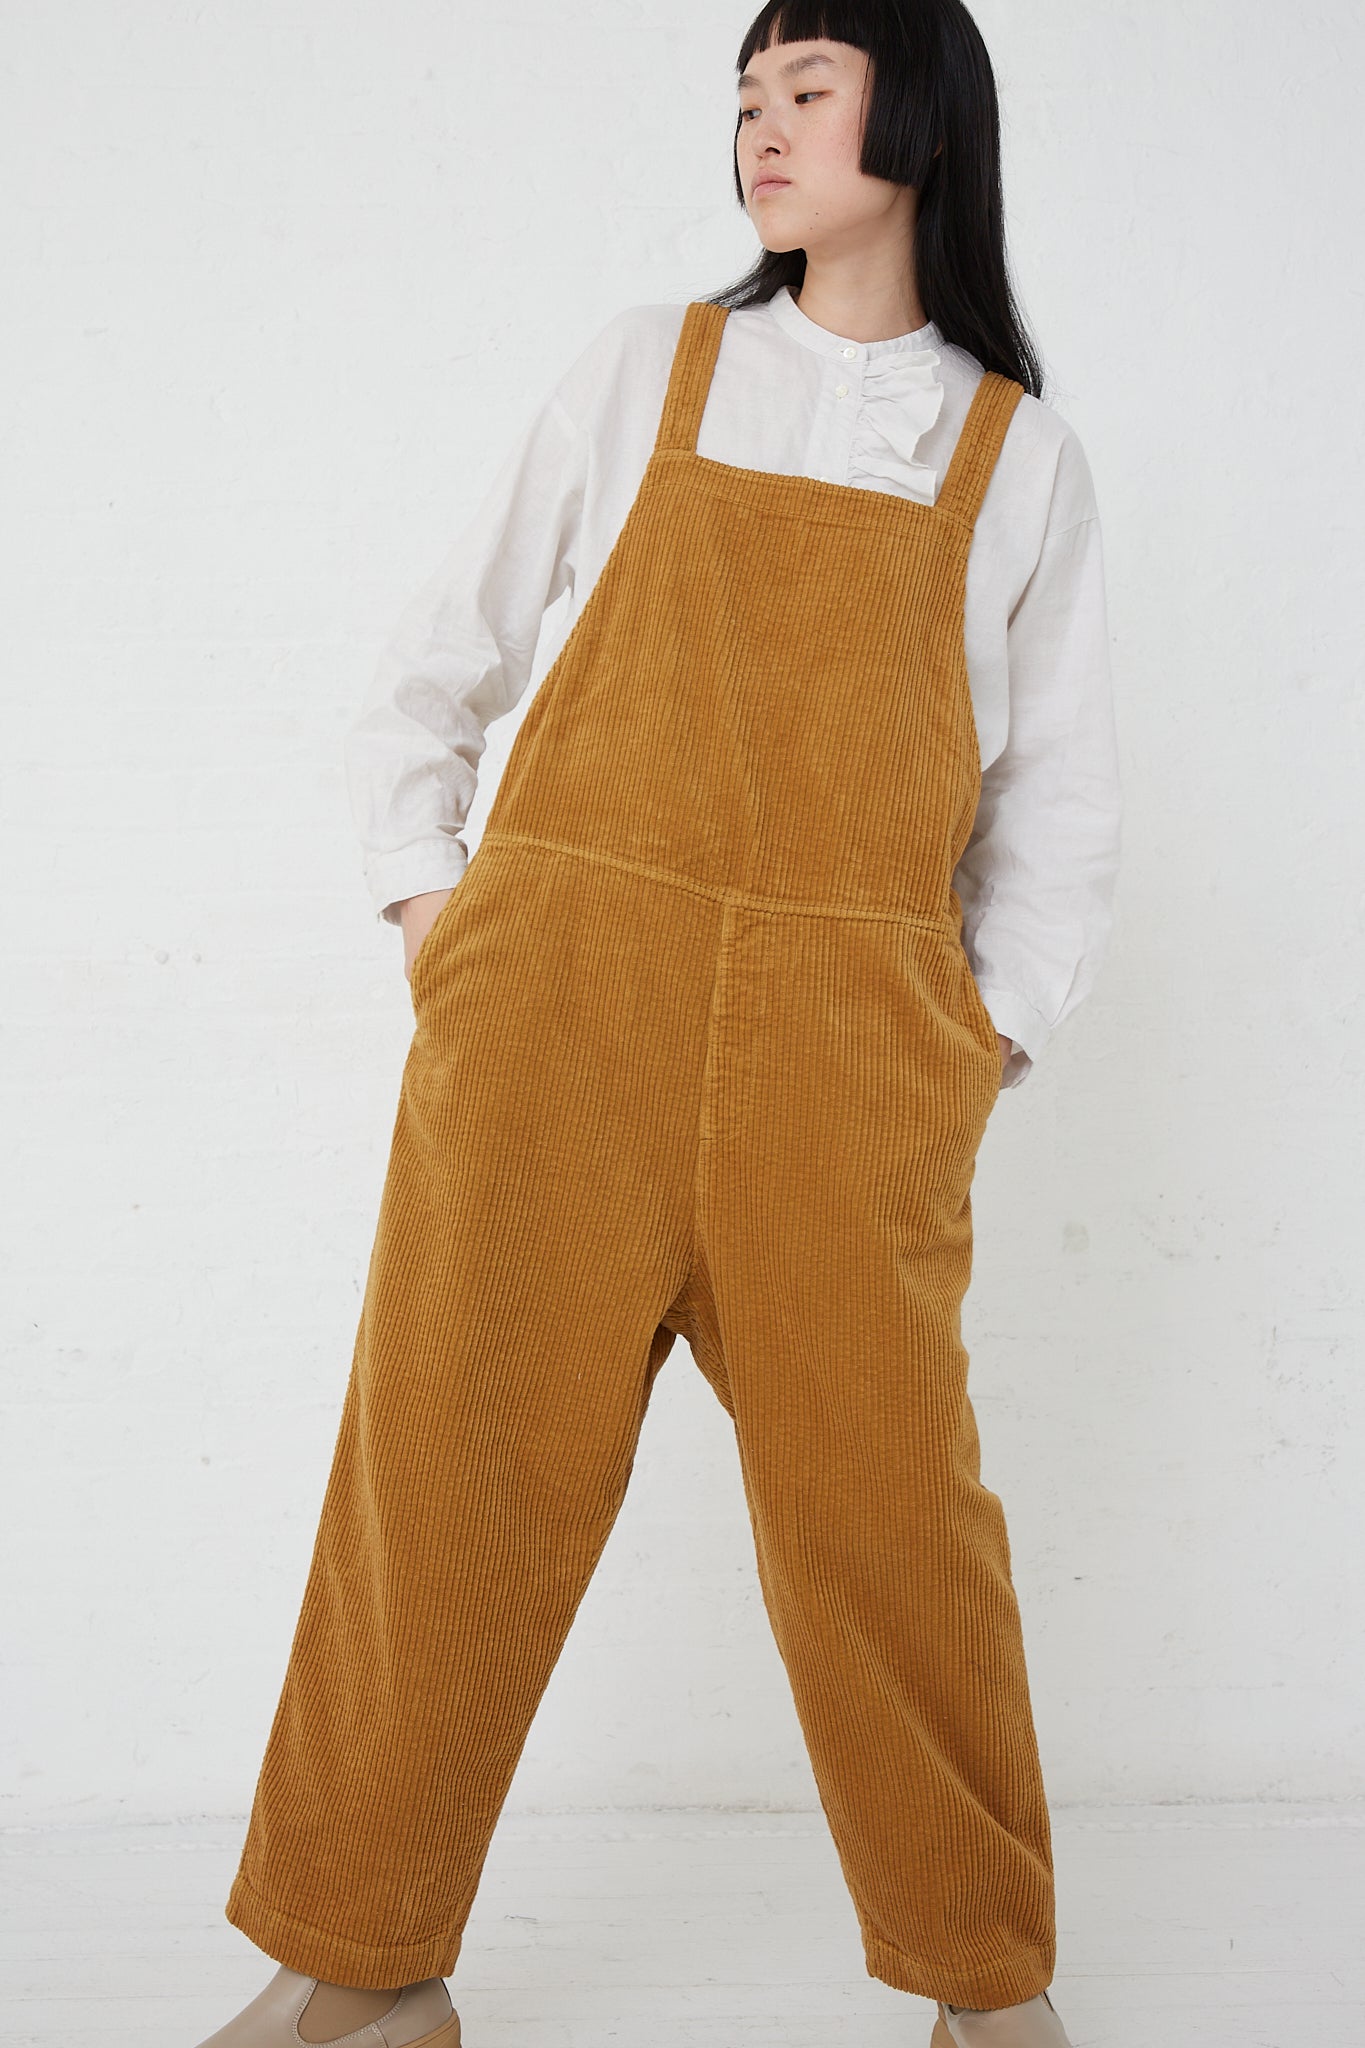 The model is wearing Nest Robe's Cotton Corduroy Overall in Camel.